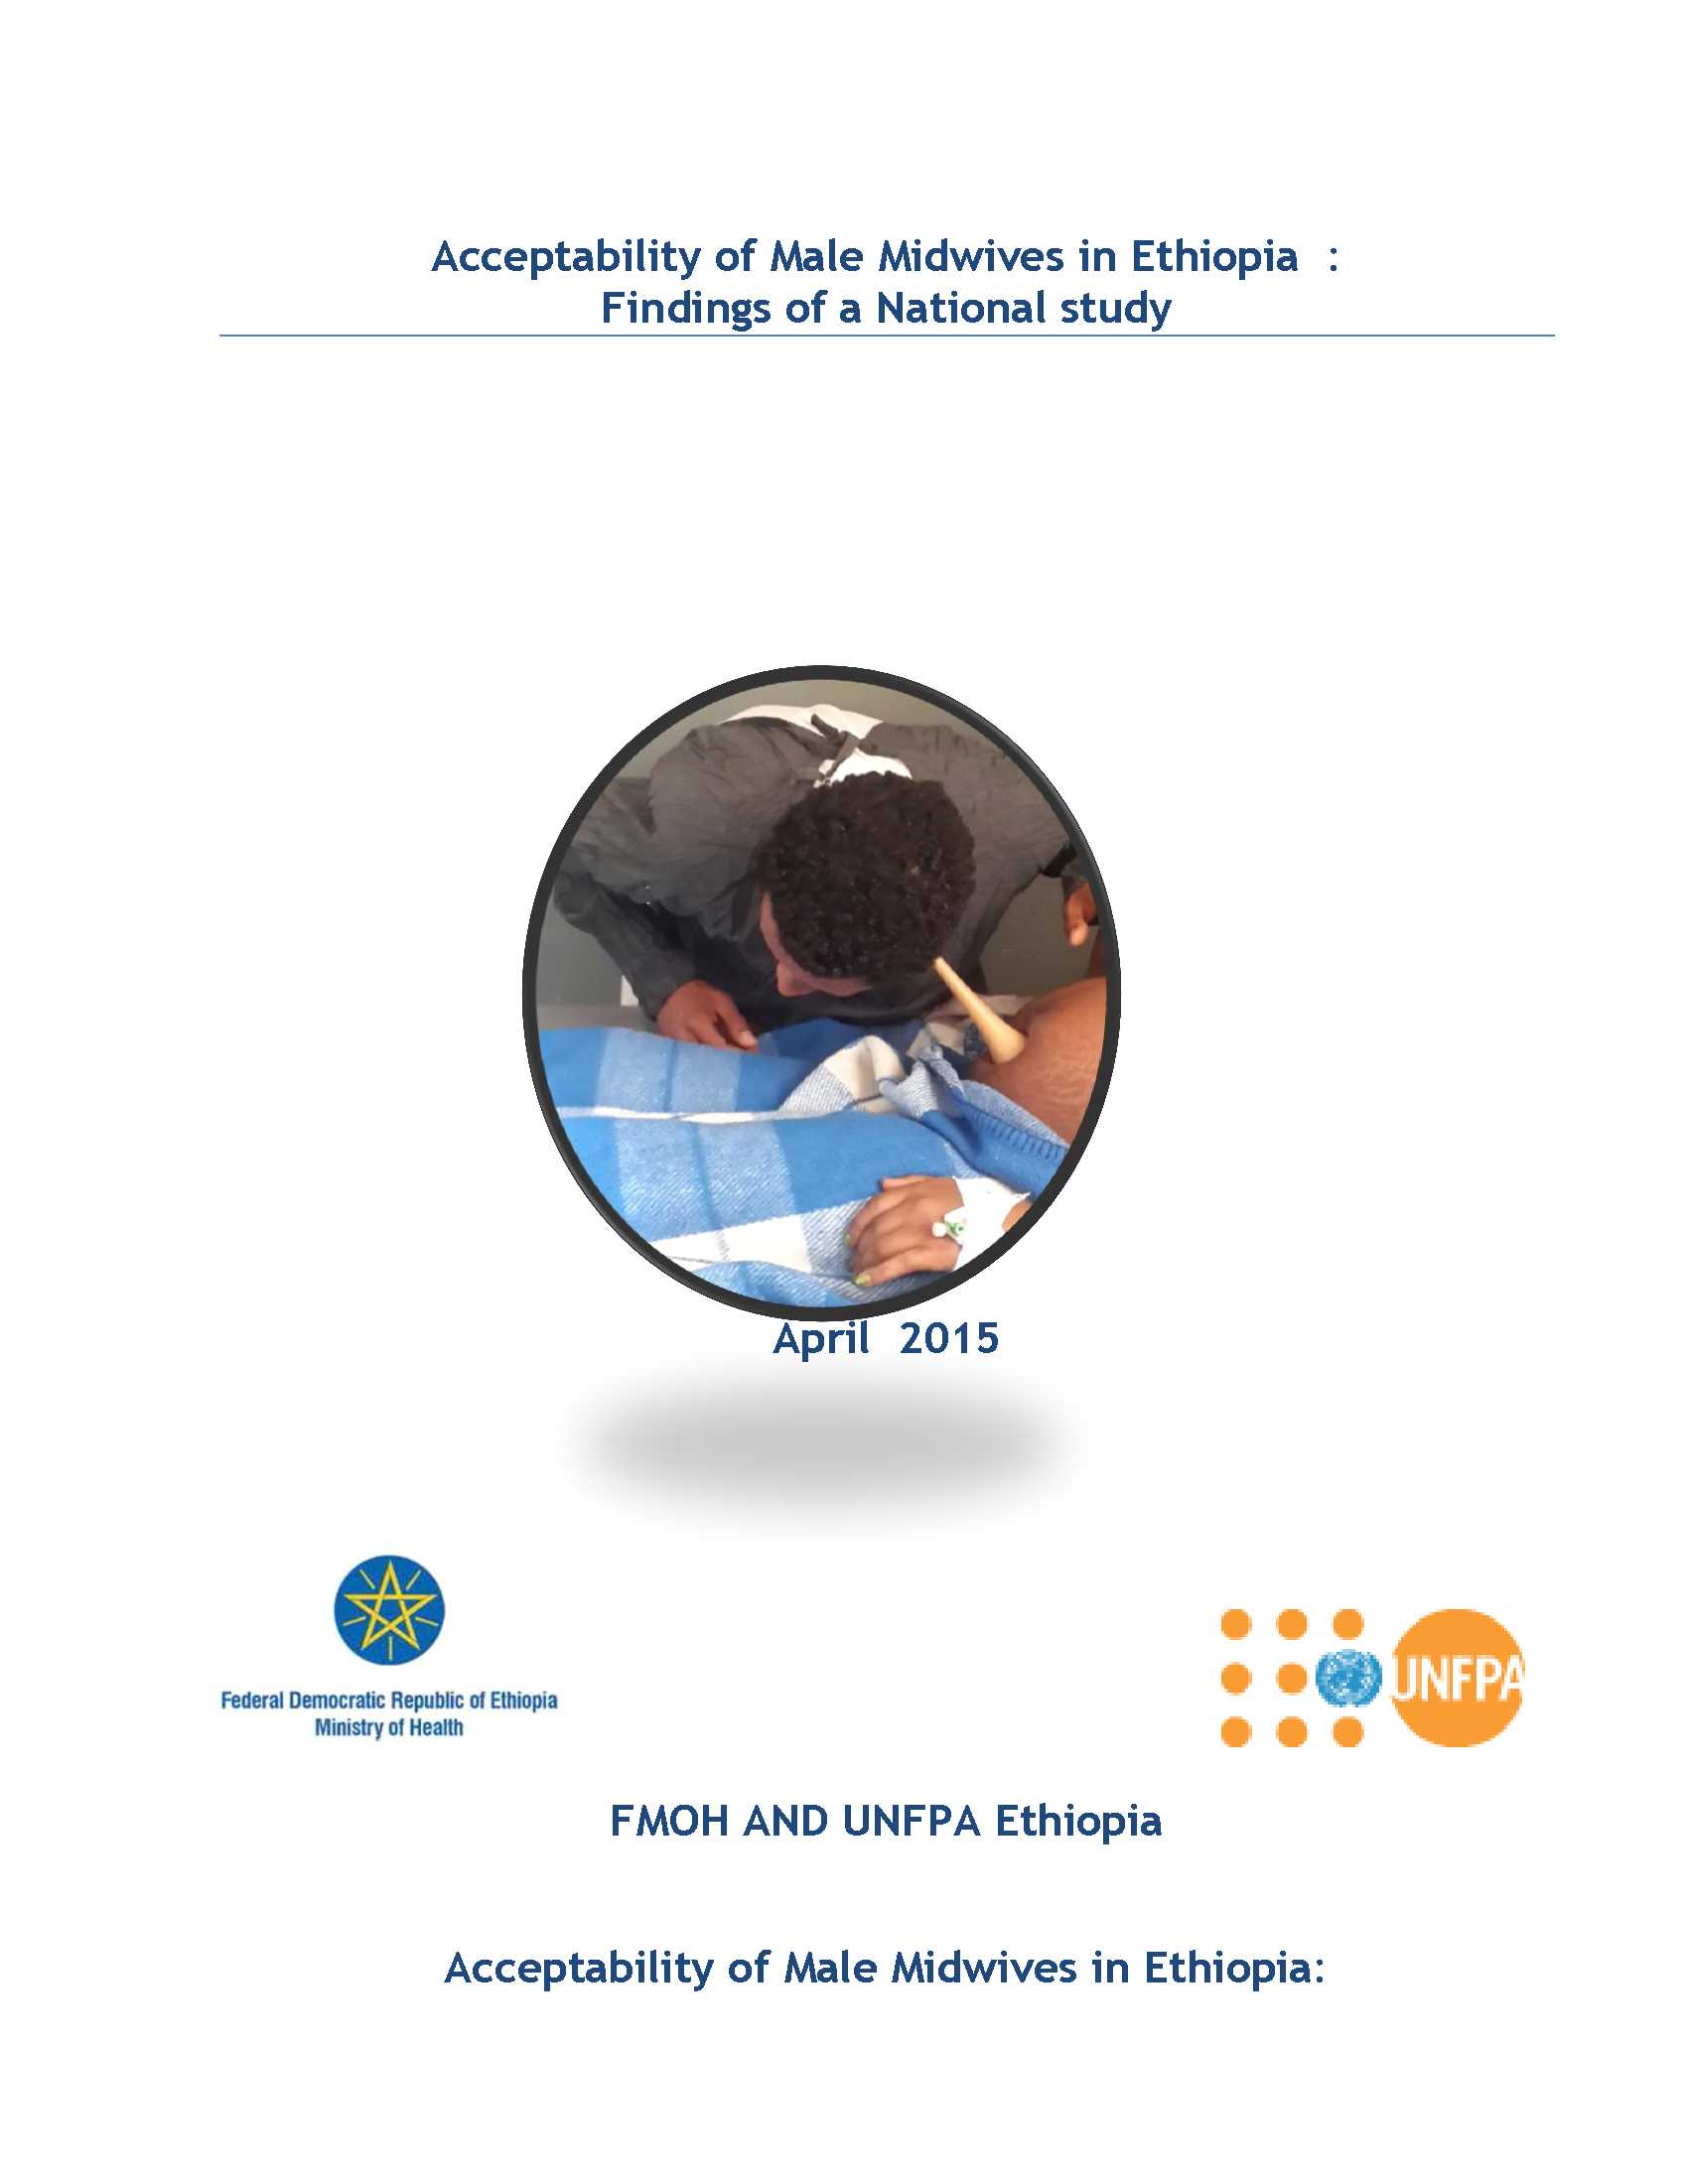 Acceptability of Male Midwives in Ethiopia : Findings of a National Study